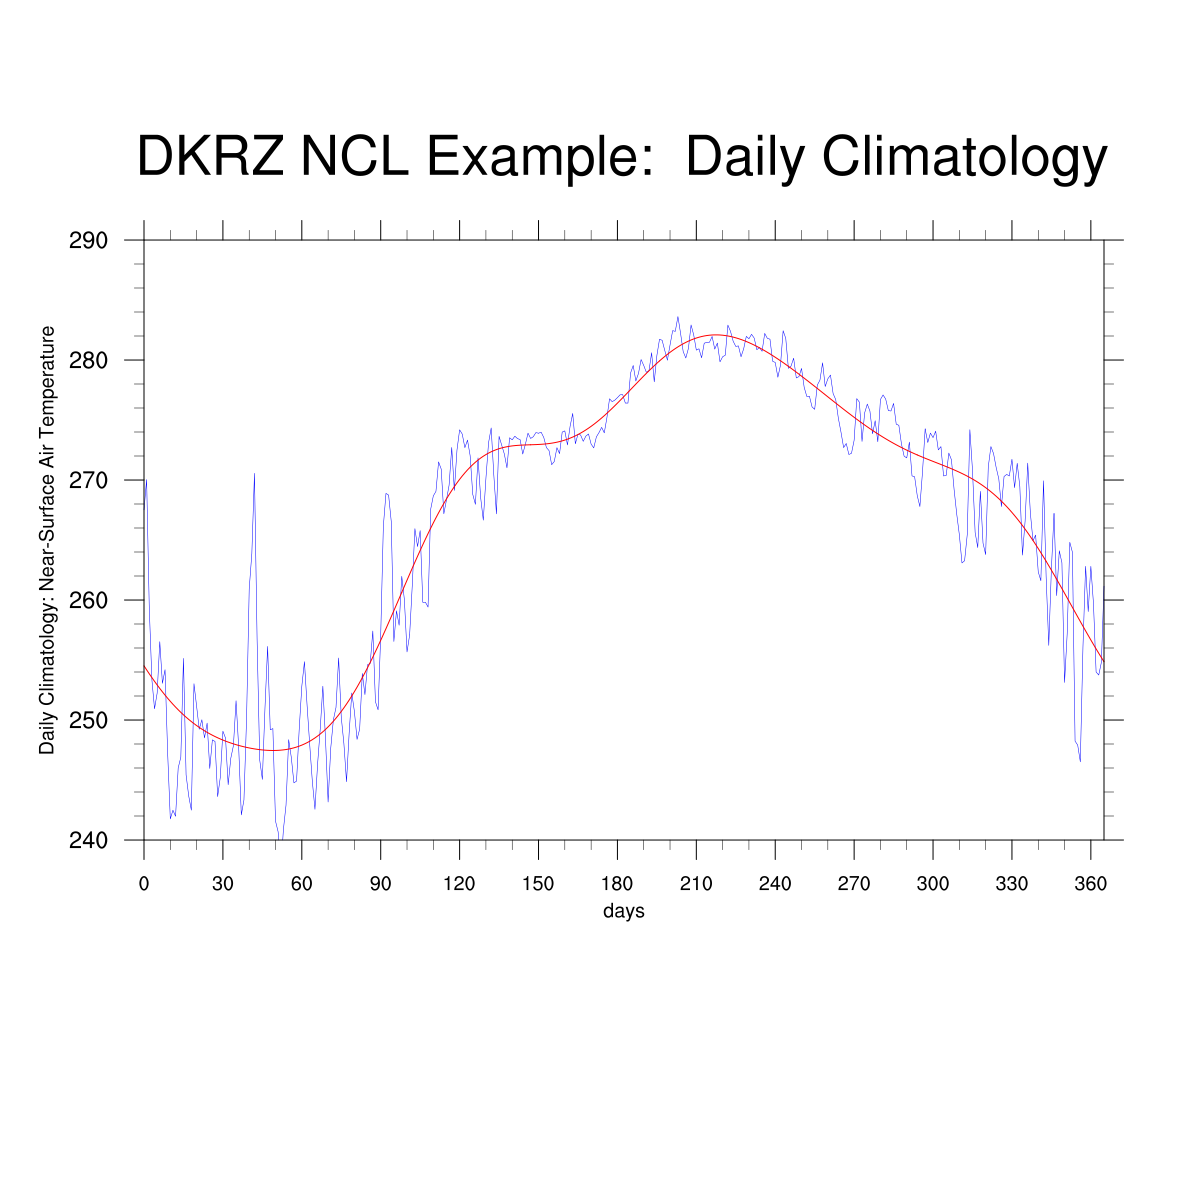 ../../../../../../_images/plot_daily_climatology_w400.png